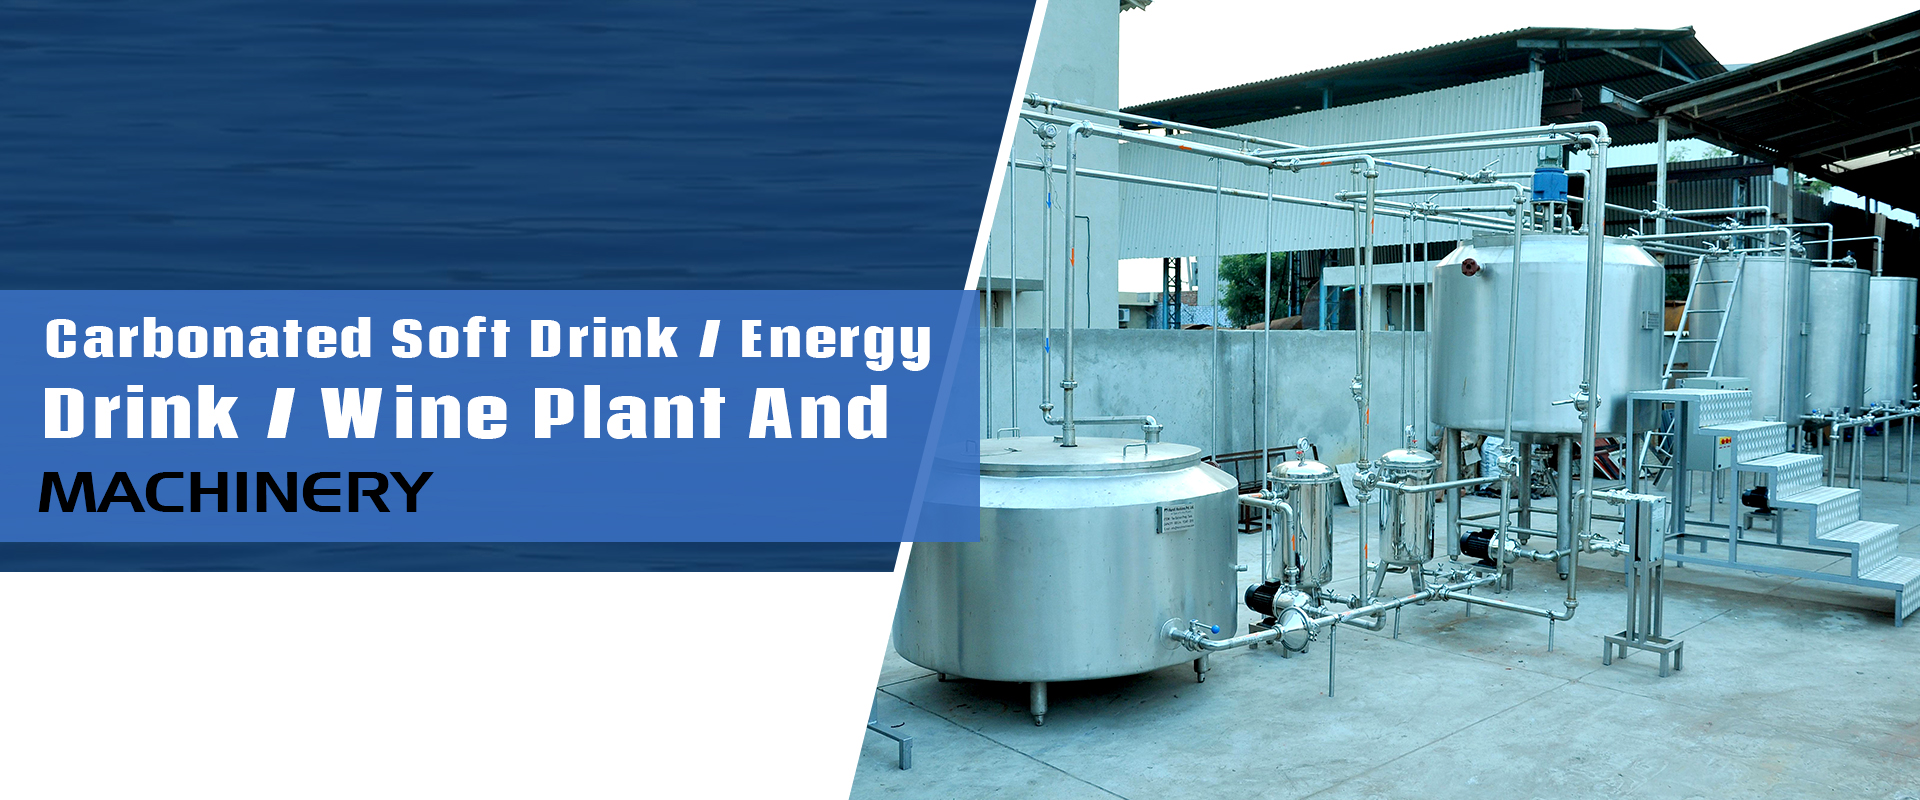 Carbonated Soft Drink / Energy Drink / Wine Plant And Machinery In Ionian Islands